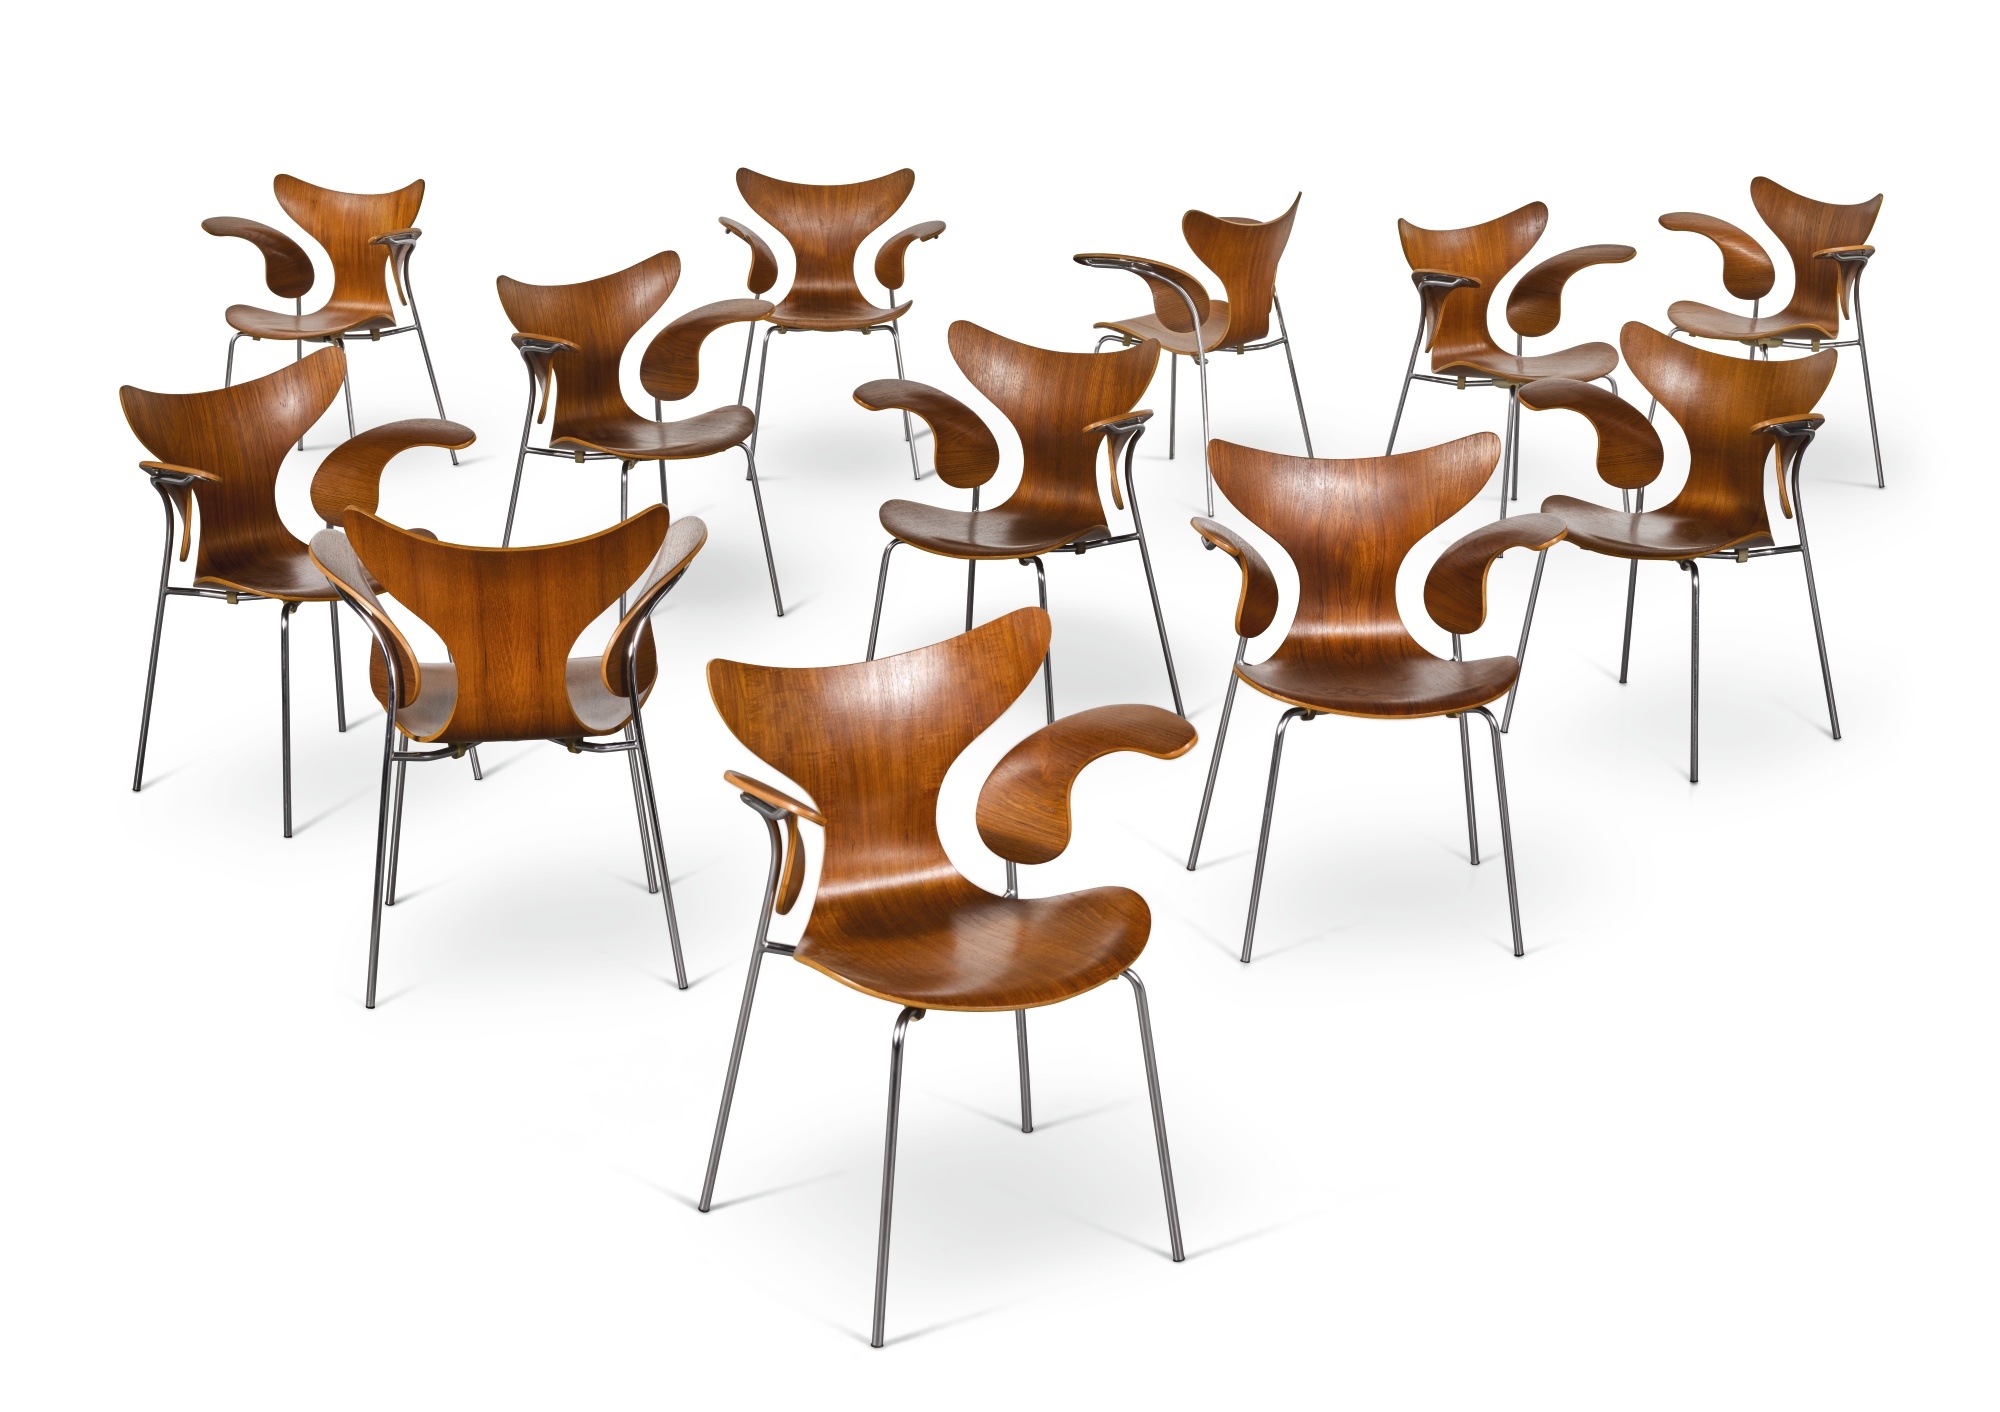 SET OF TWELVE 'LILY' ARMCHAIRS, MODEL NO. 3208 by Arne Jacobsen, designed 1970, executed 1973